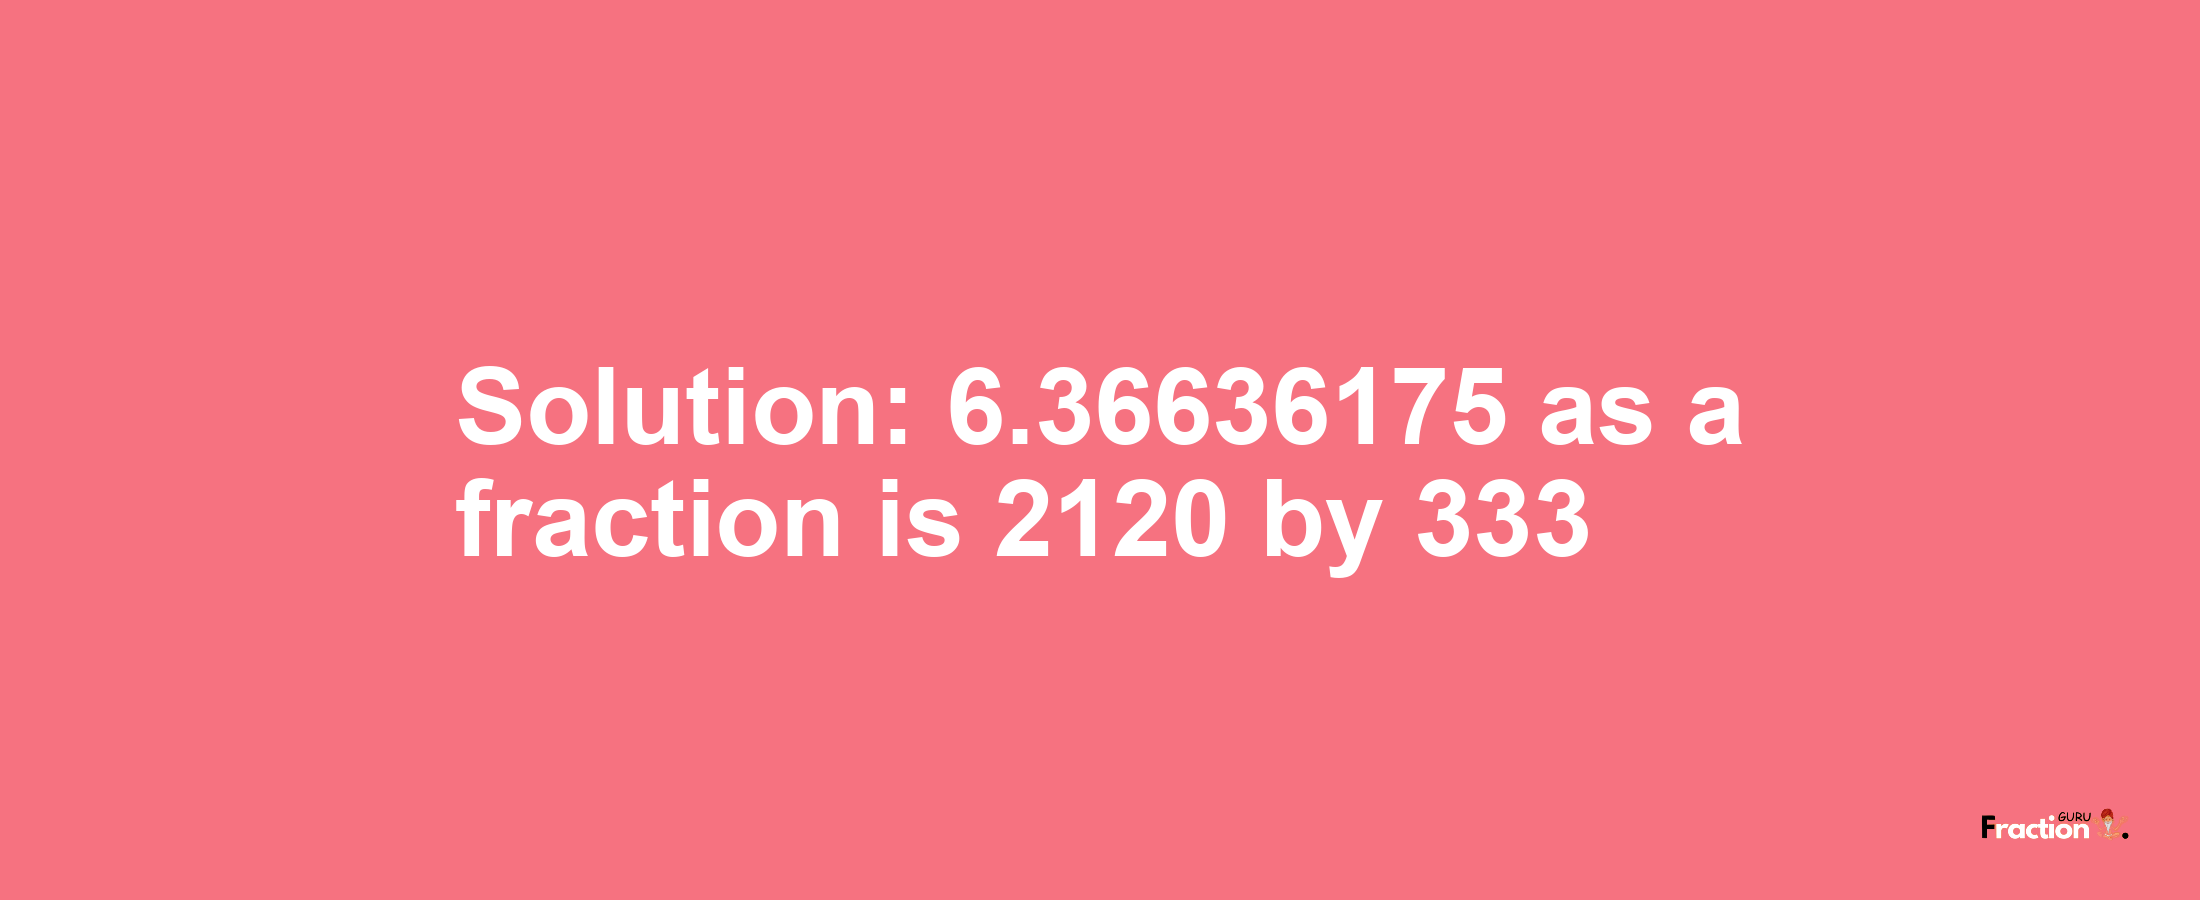 Solution:6.36636175 as a fraction is 2120/333